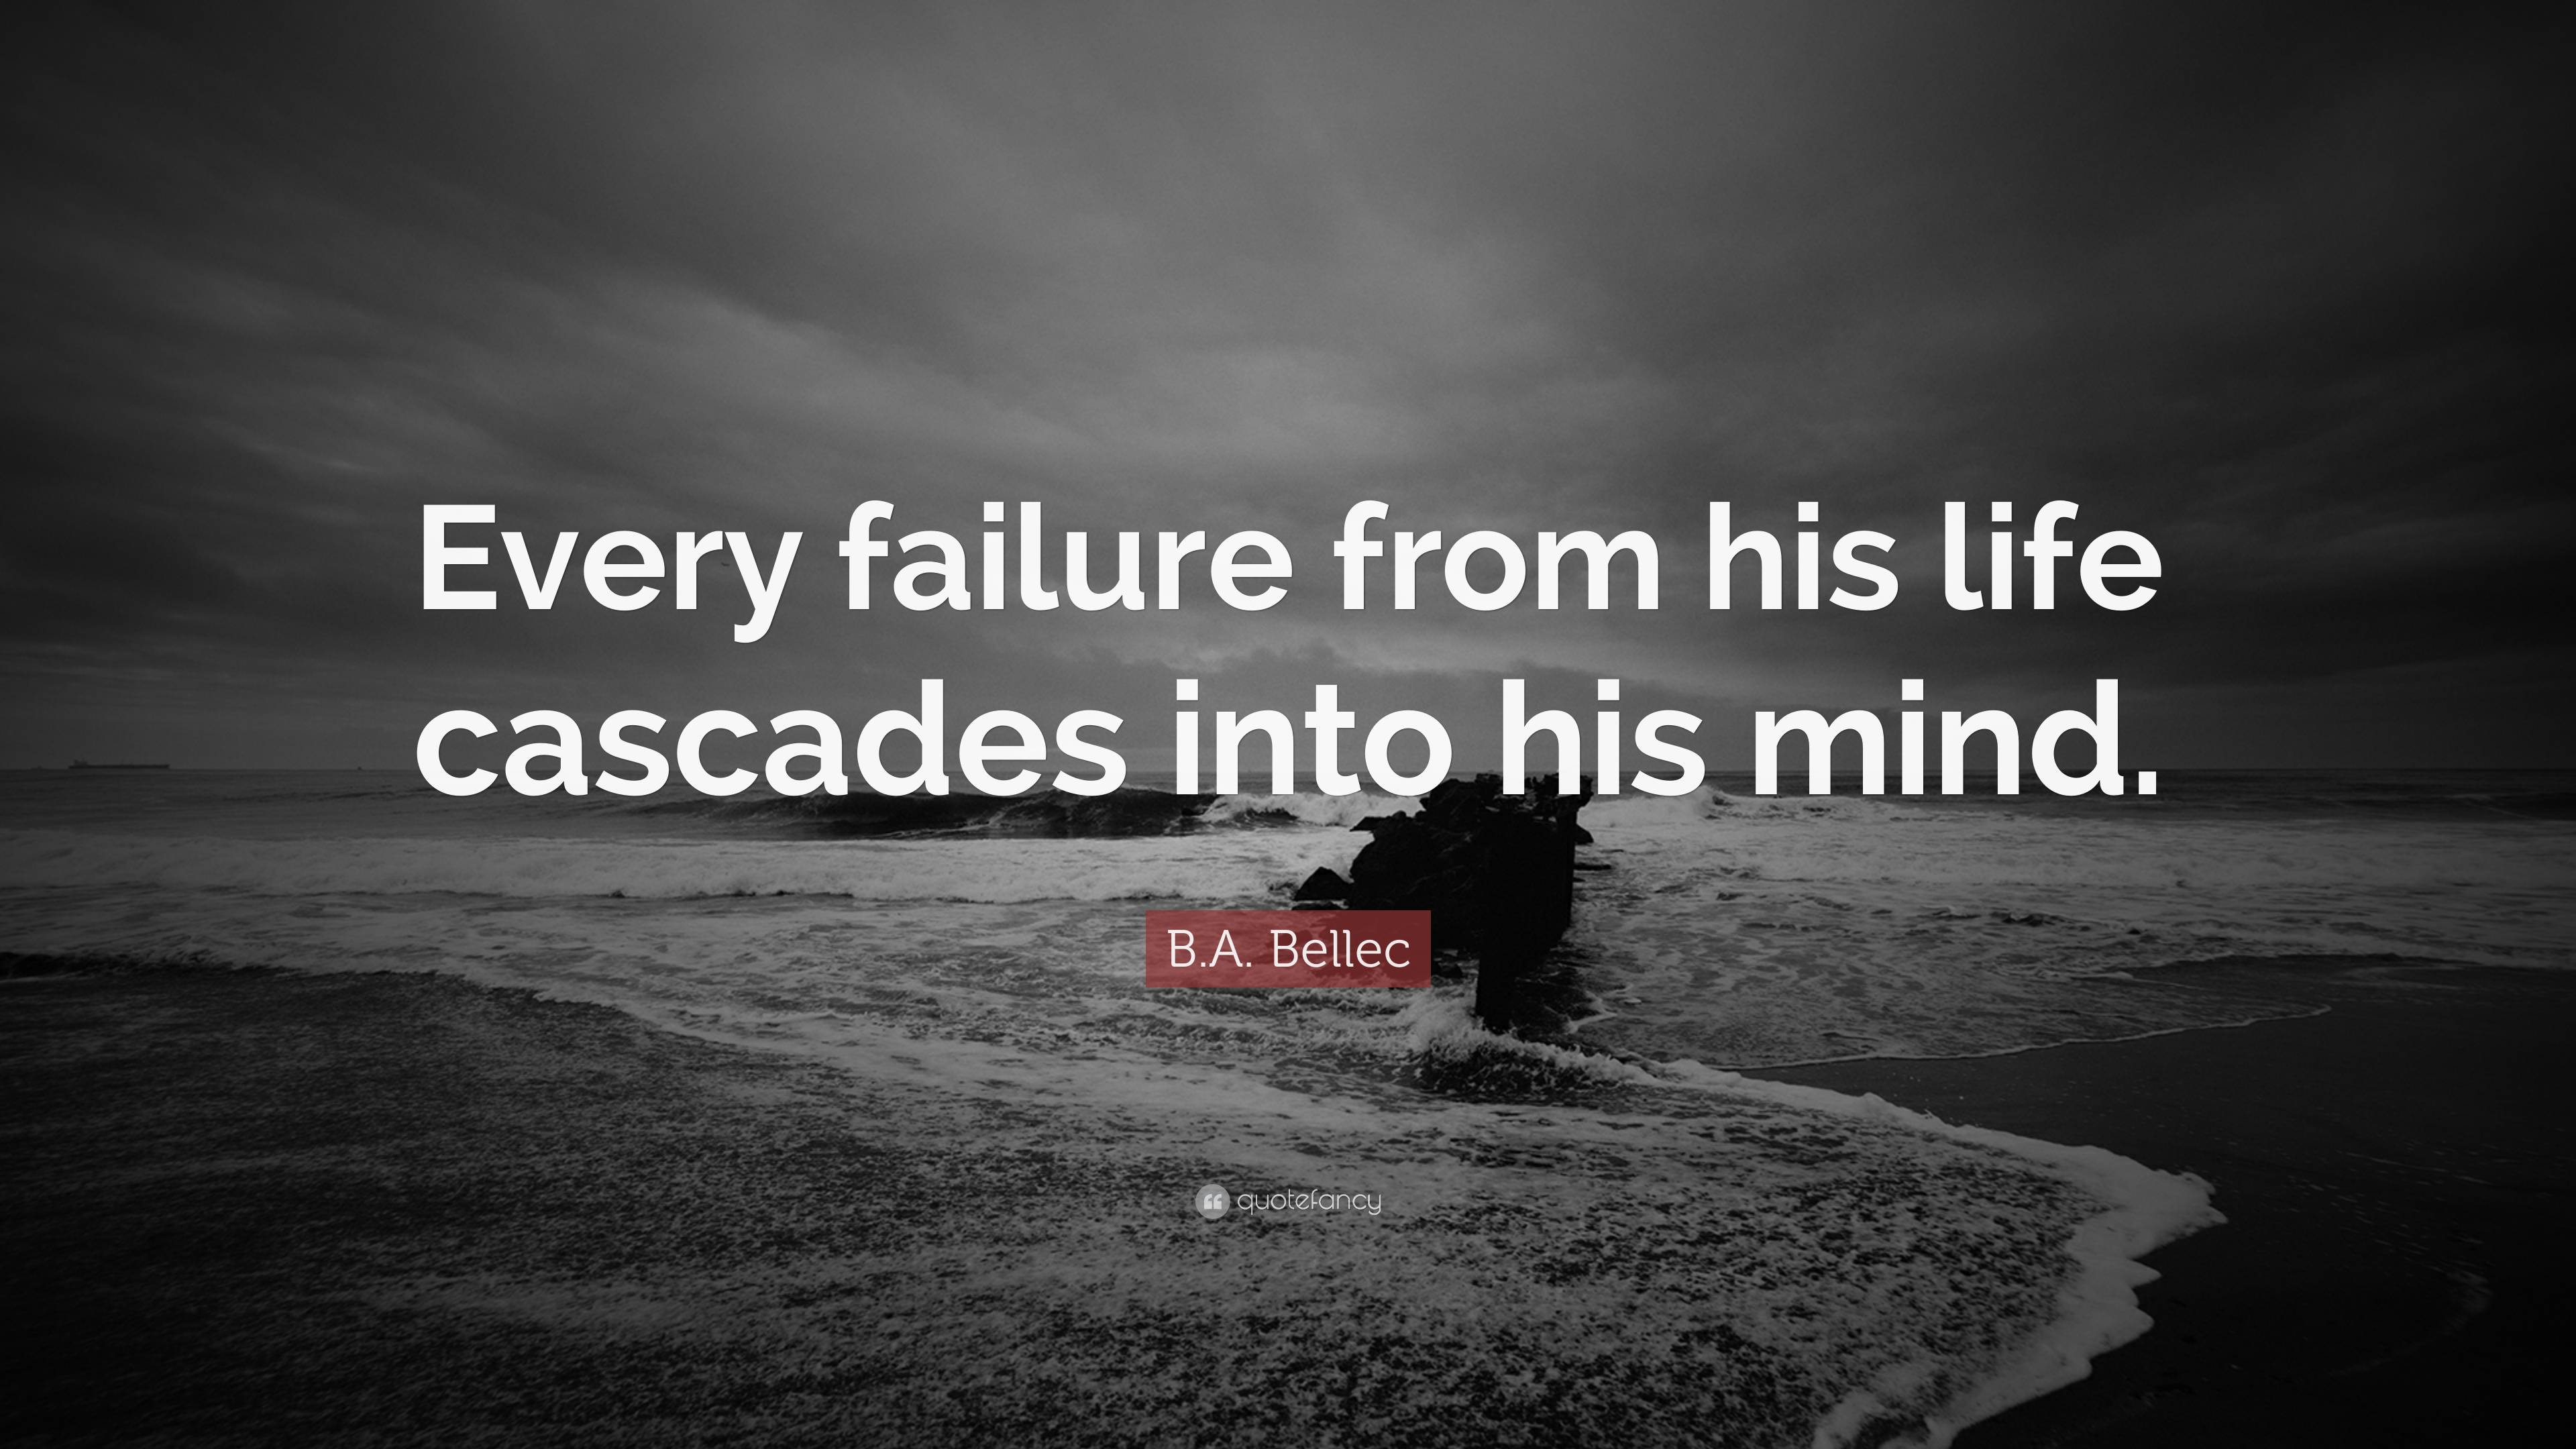 B.A. Bellec Quote: “Every failure from his life cascades into his mind.”